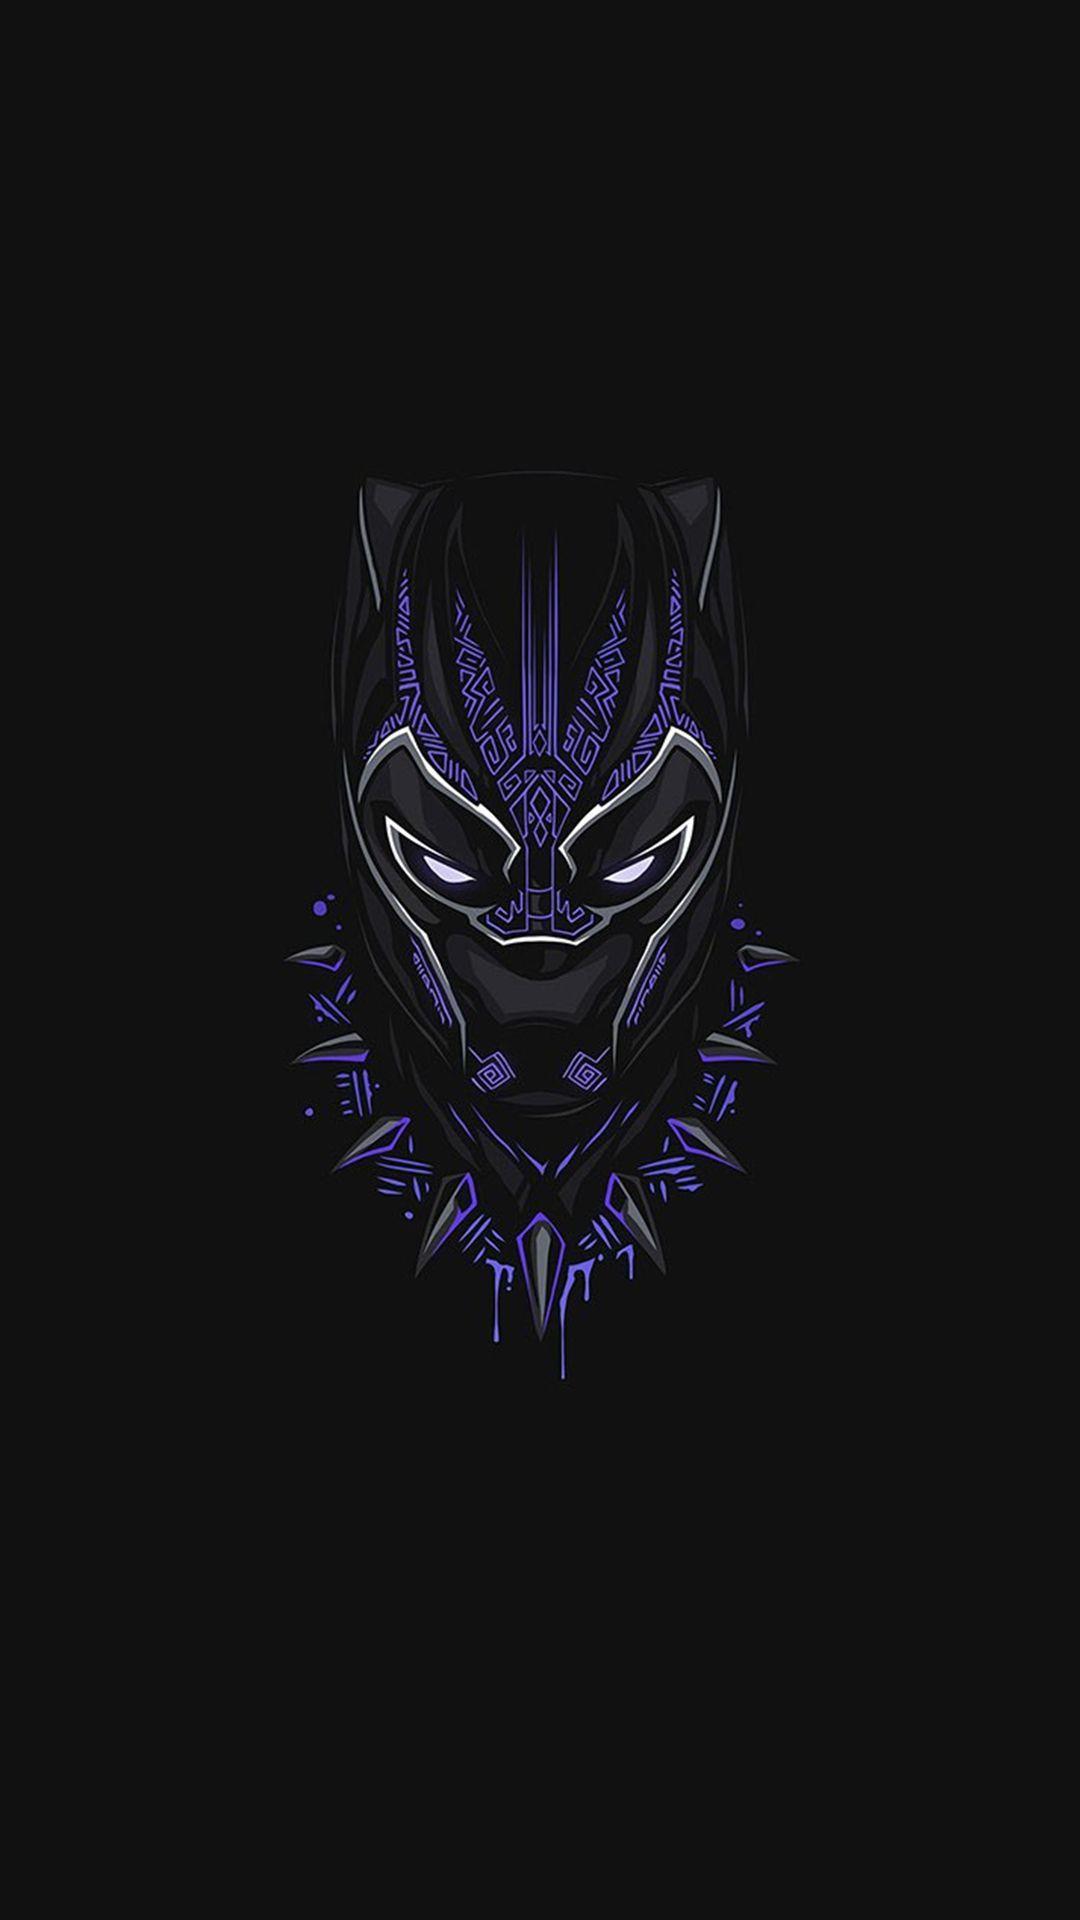 1080 x 1920 · jpeg - Neon Black Panther Wallpapers - Wallpaper Cave